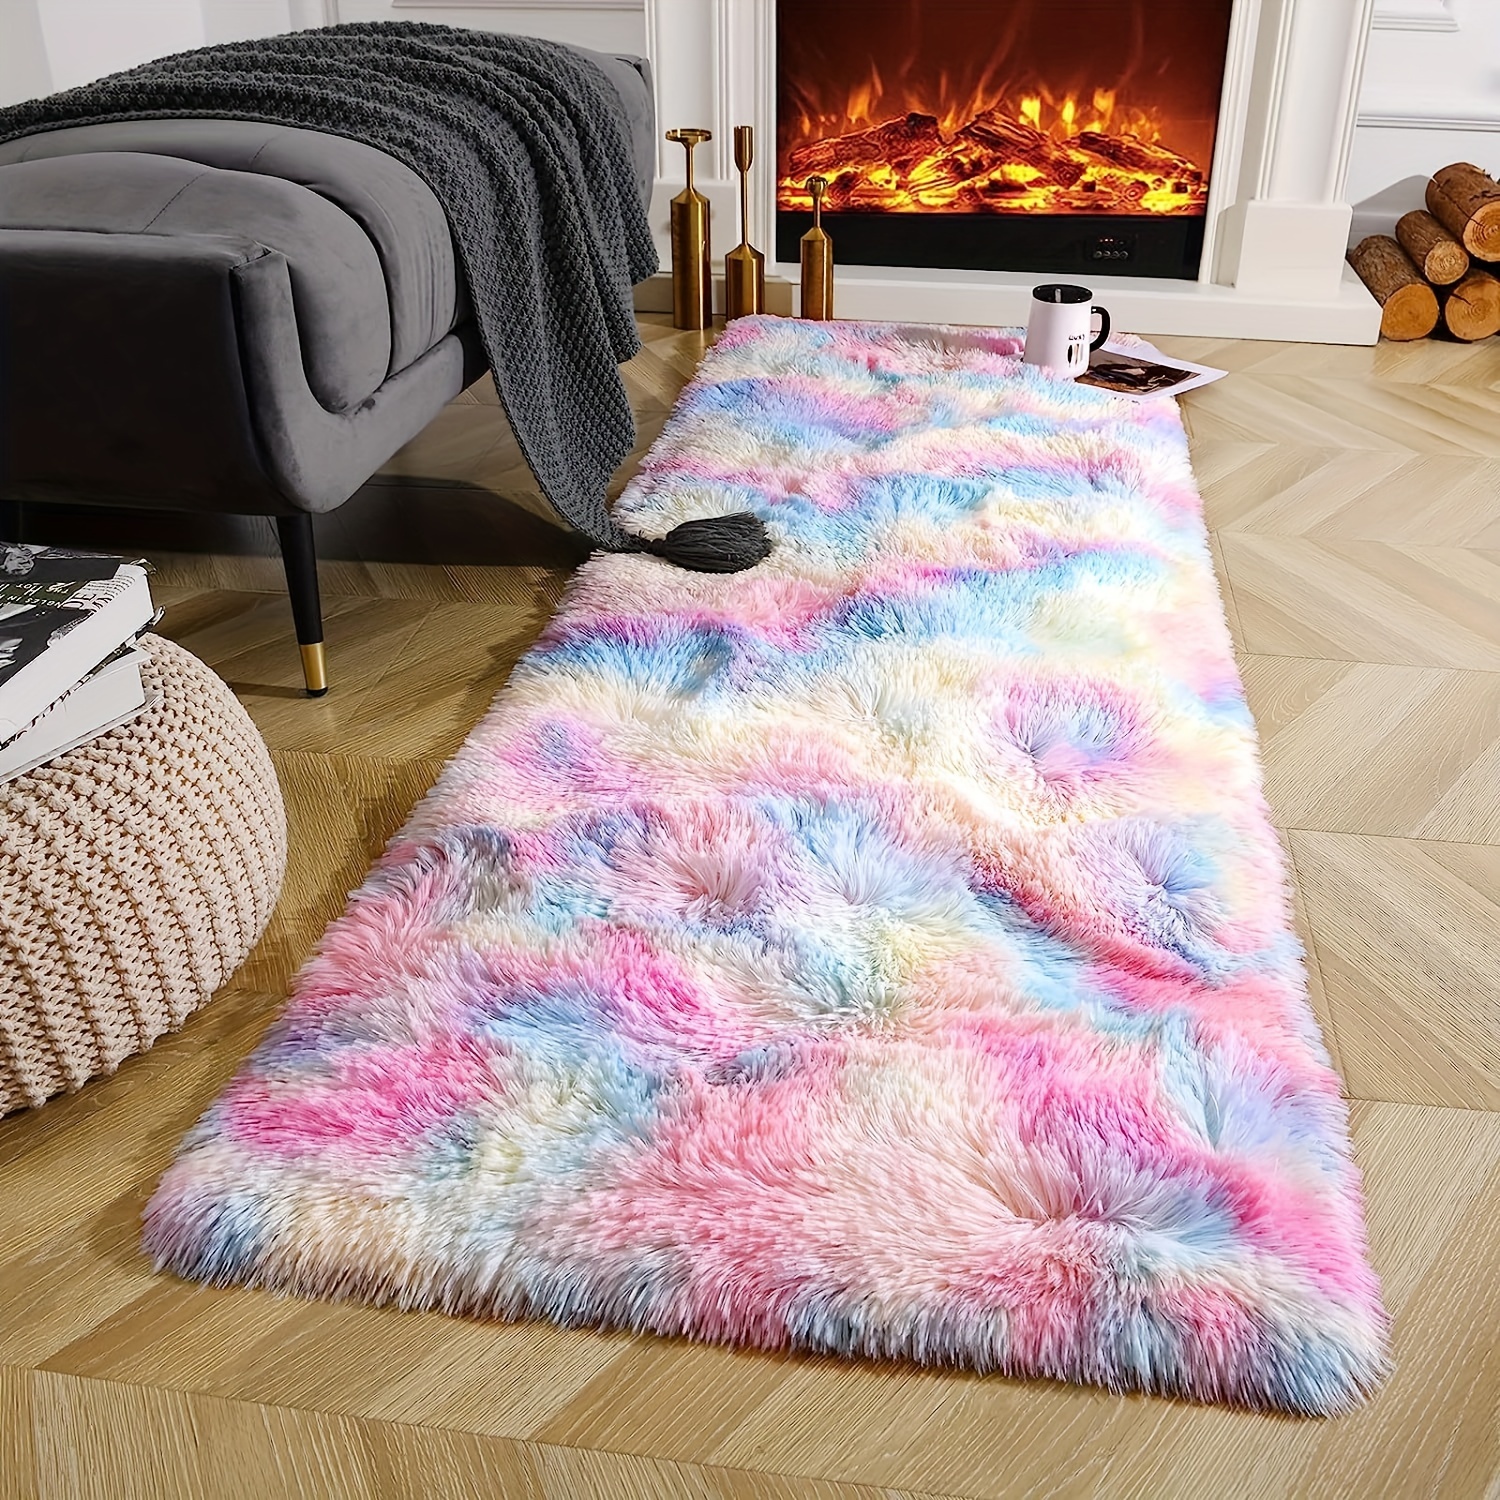 

Rainbow Large Area Rug Soft Livingroom Rug Fluffy Durable Perfect For Any Room Easy Maintenance For